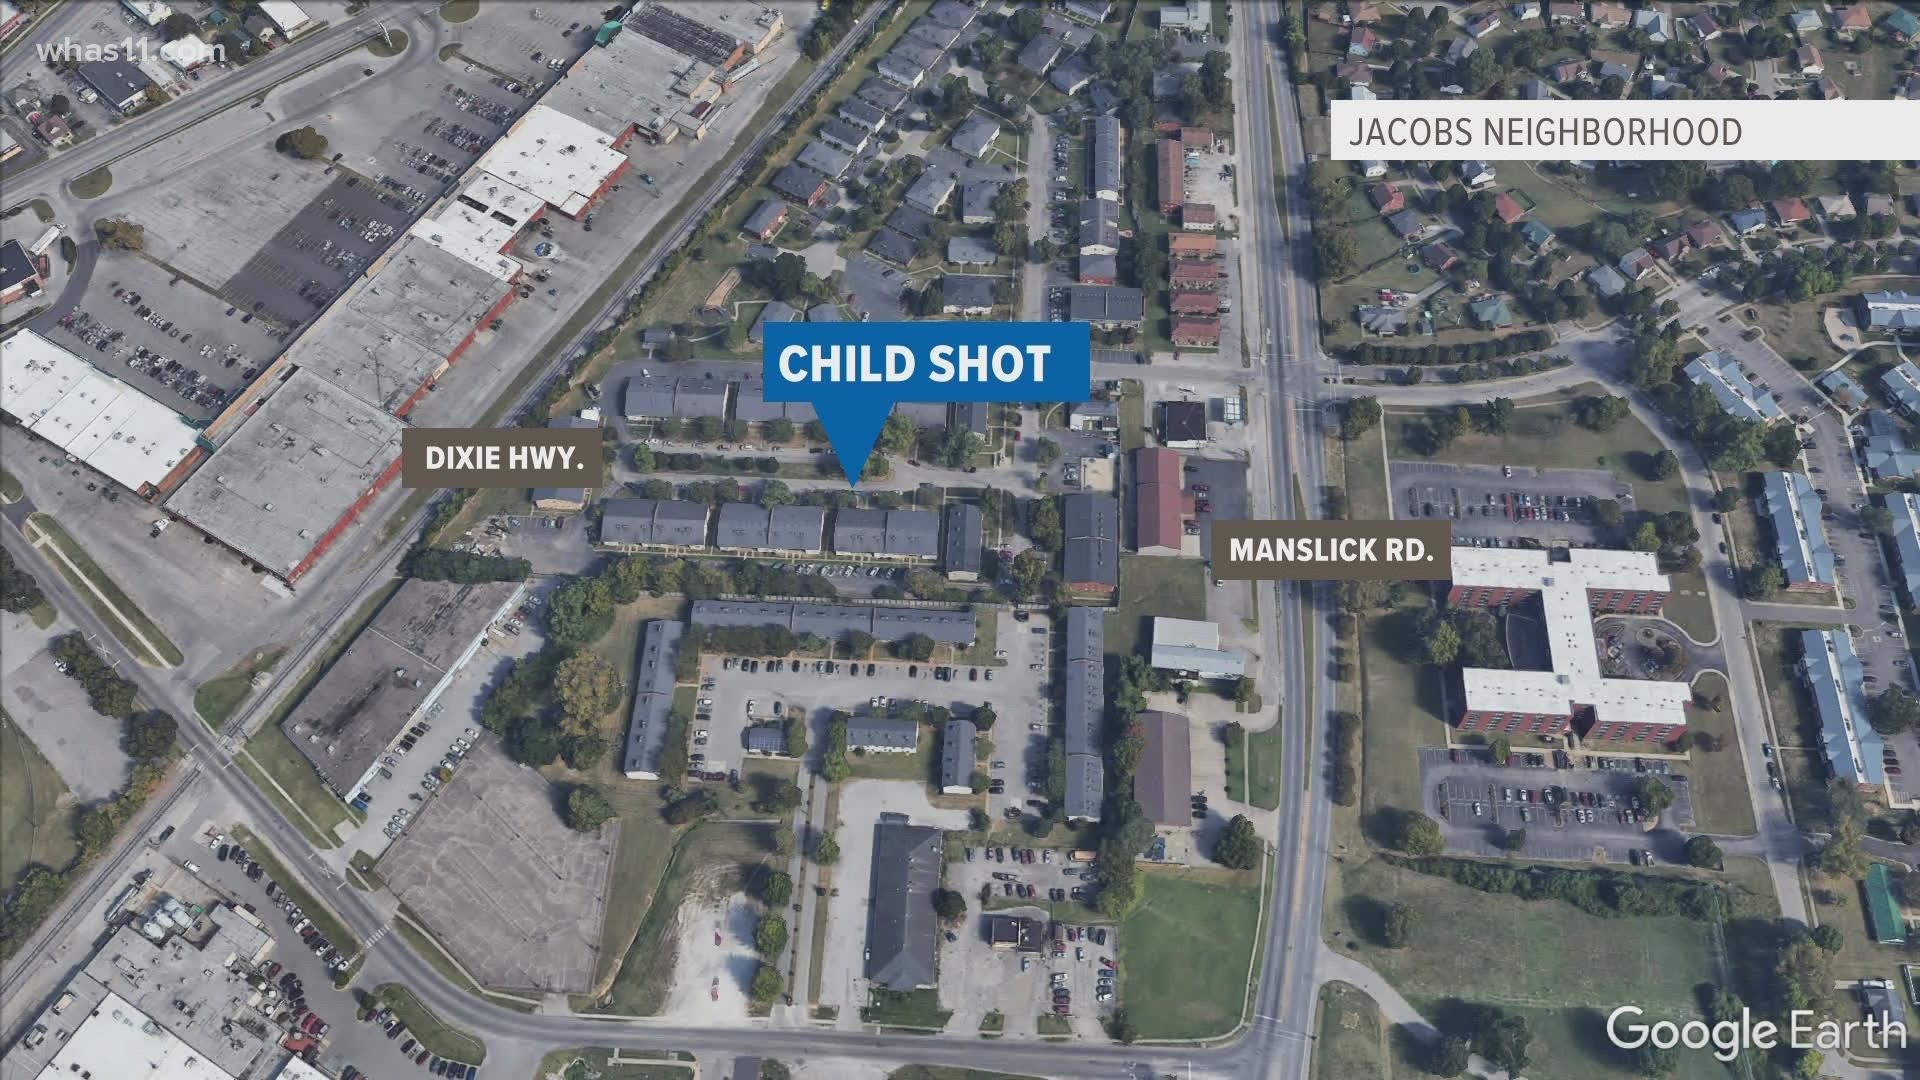 A child was shot Wednesday evening on Carl Court. The child's condition is unknown.